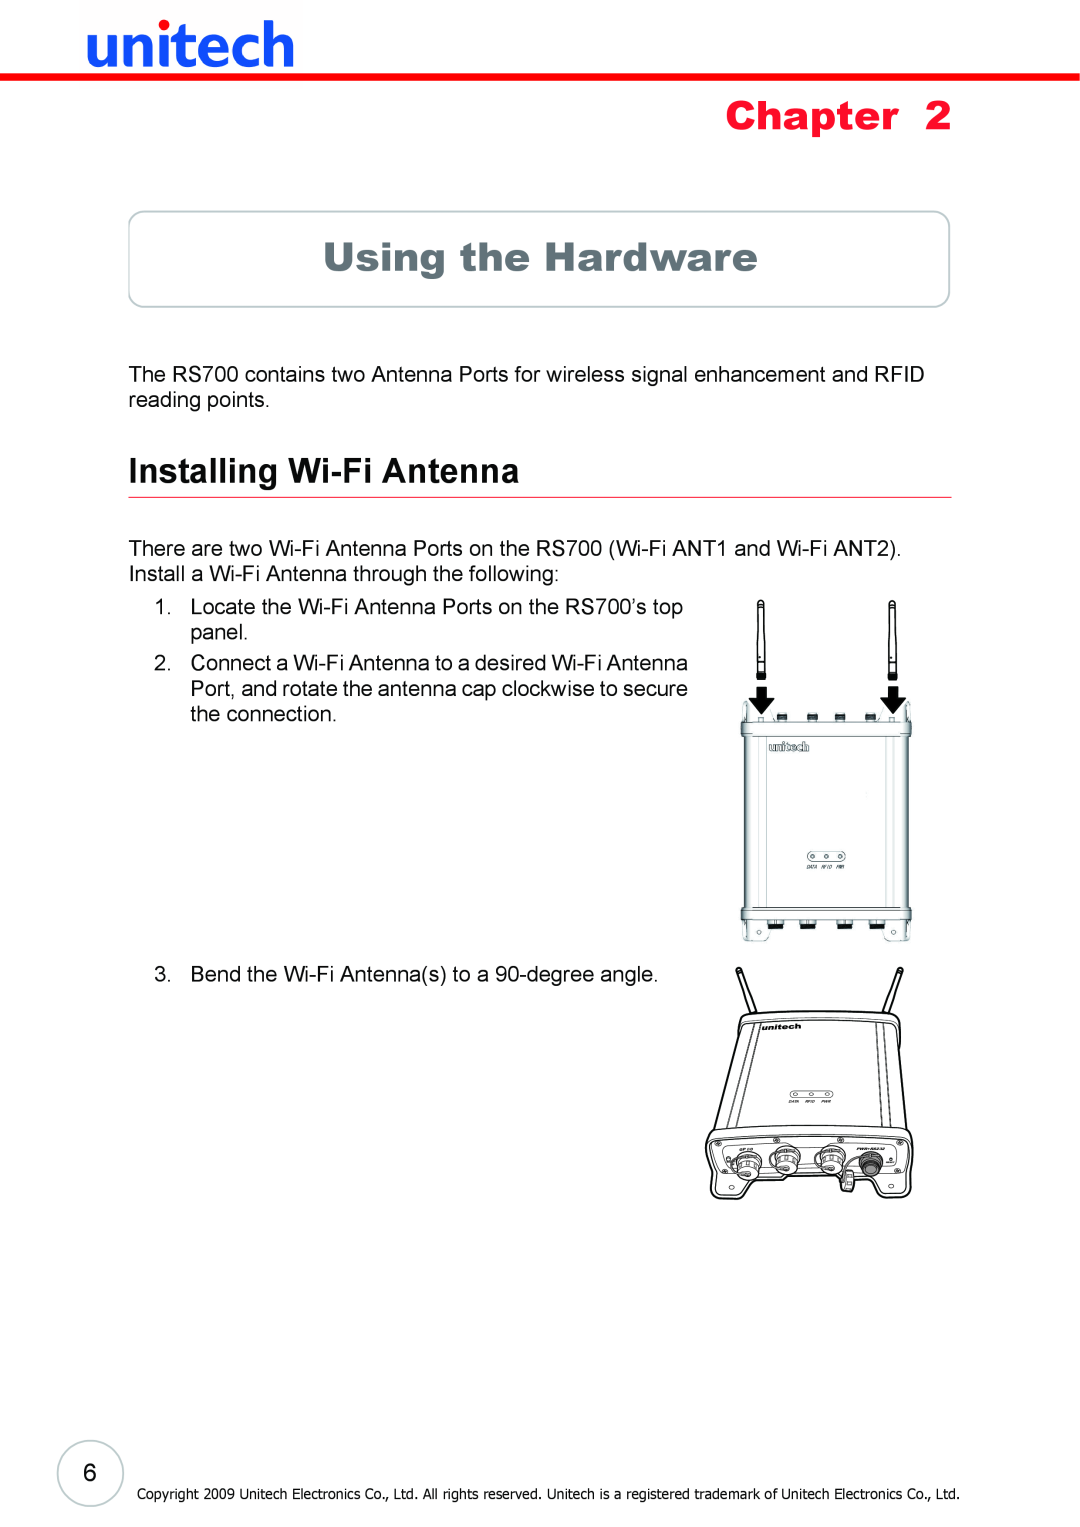 Unitech RS700 user manual Using the Hardware, Installing Wi-Fi Antenna, Chapter 